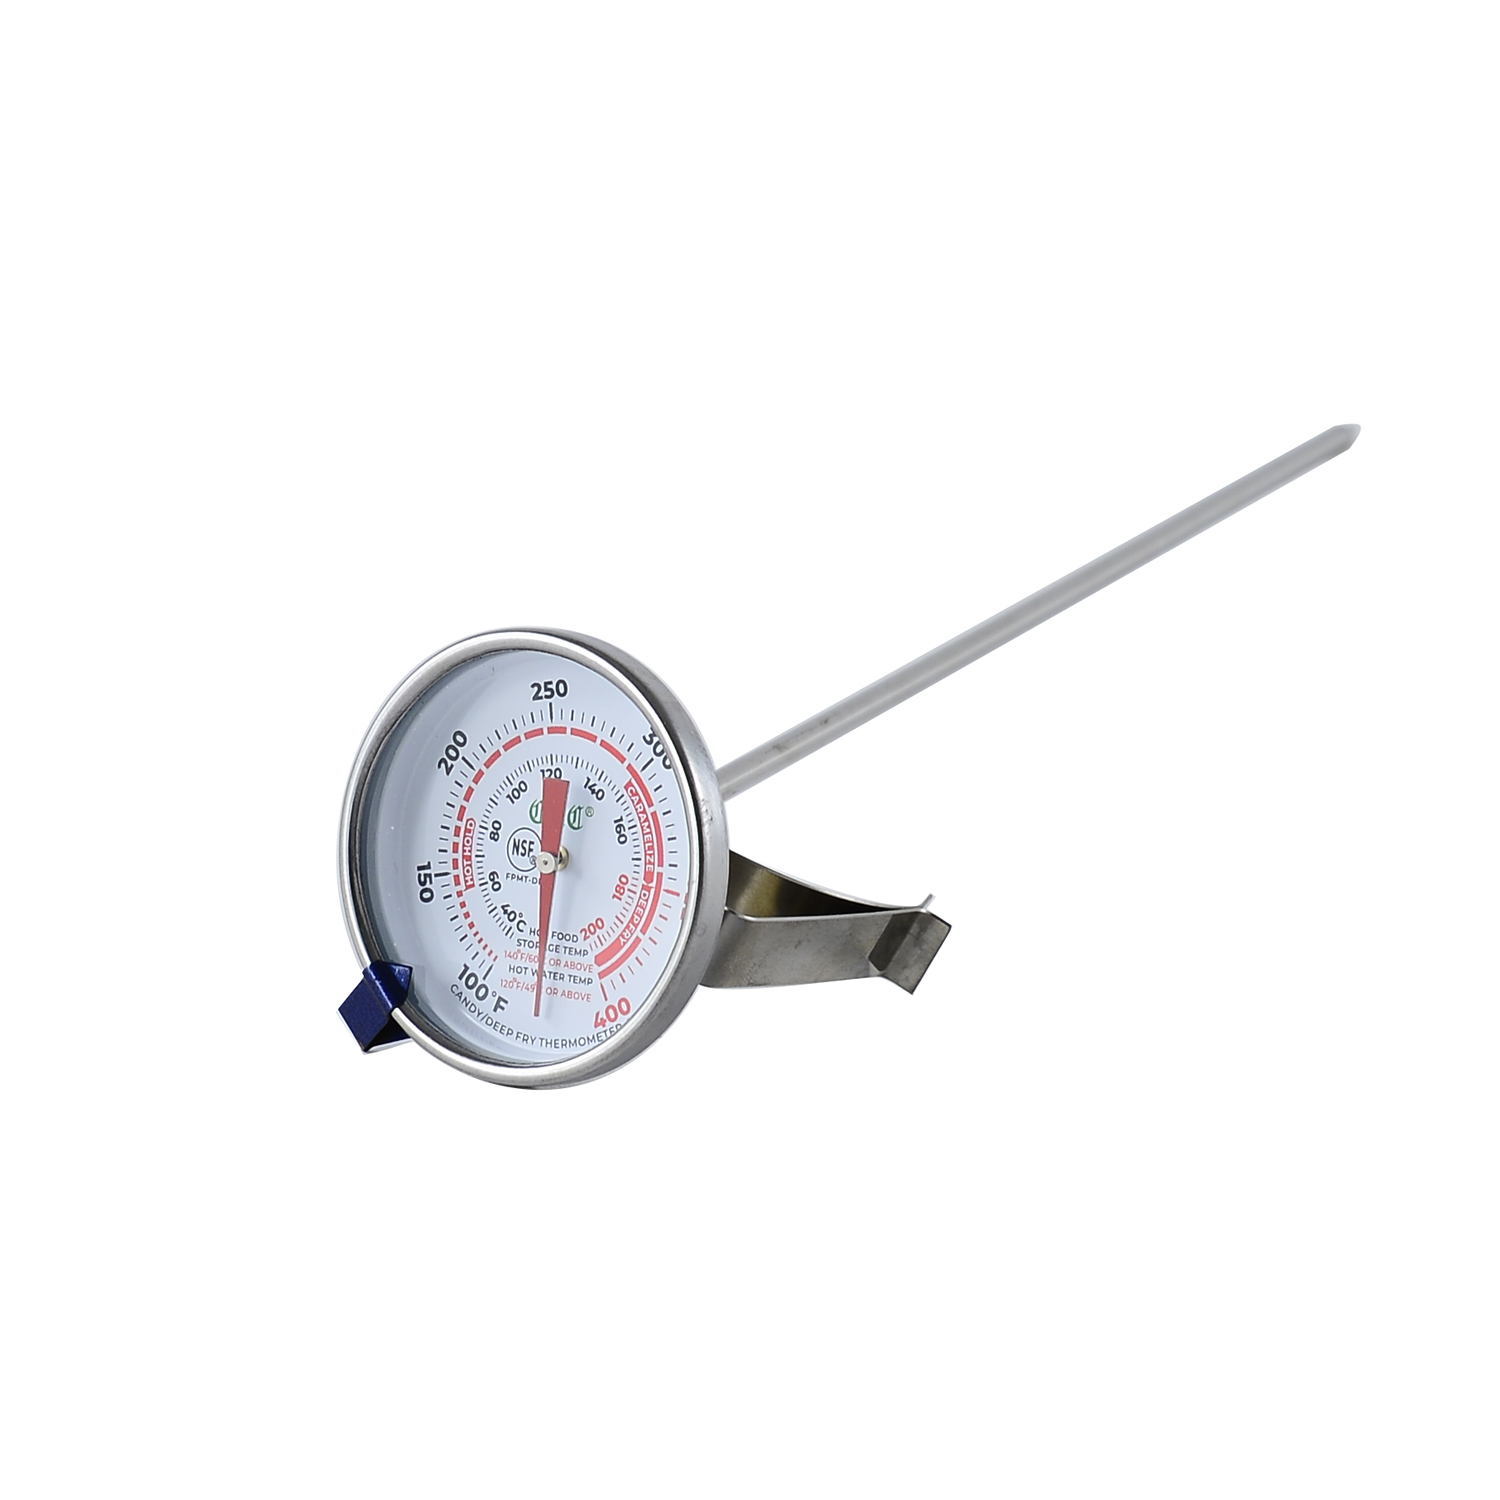 CAC China FPMT-DF13 Equil Thermo Deep Fry/Candy Thermometer, 2"Dia x 12"L